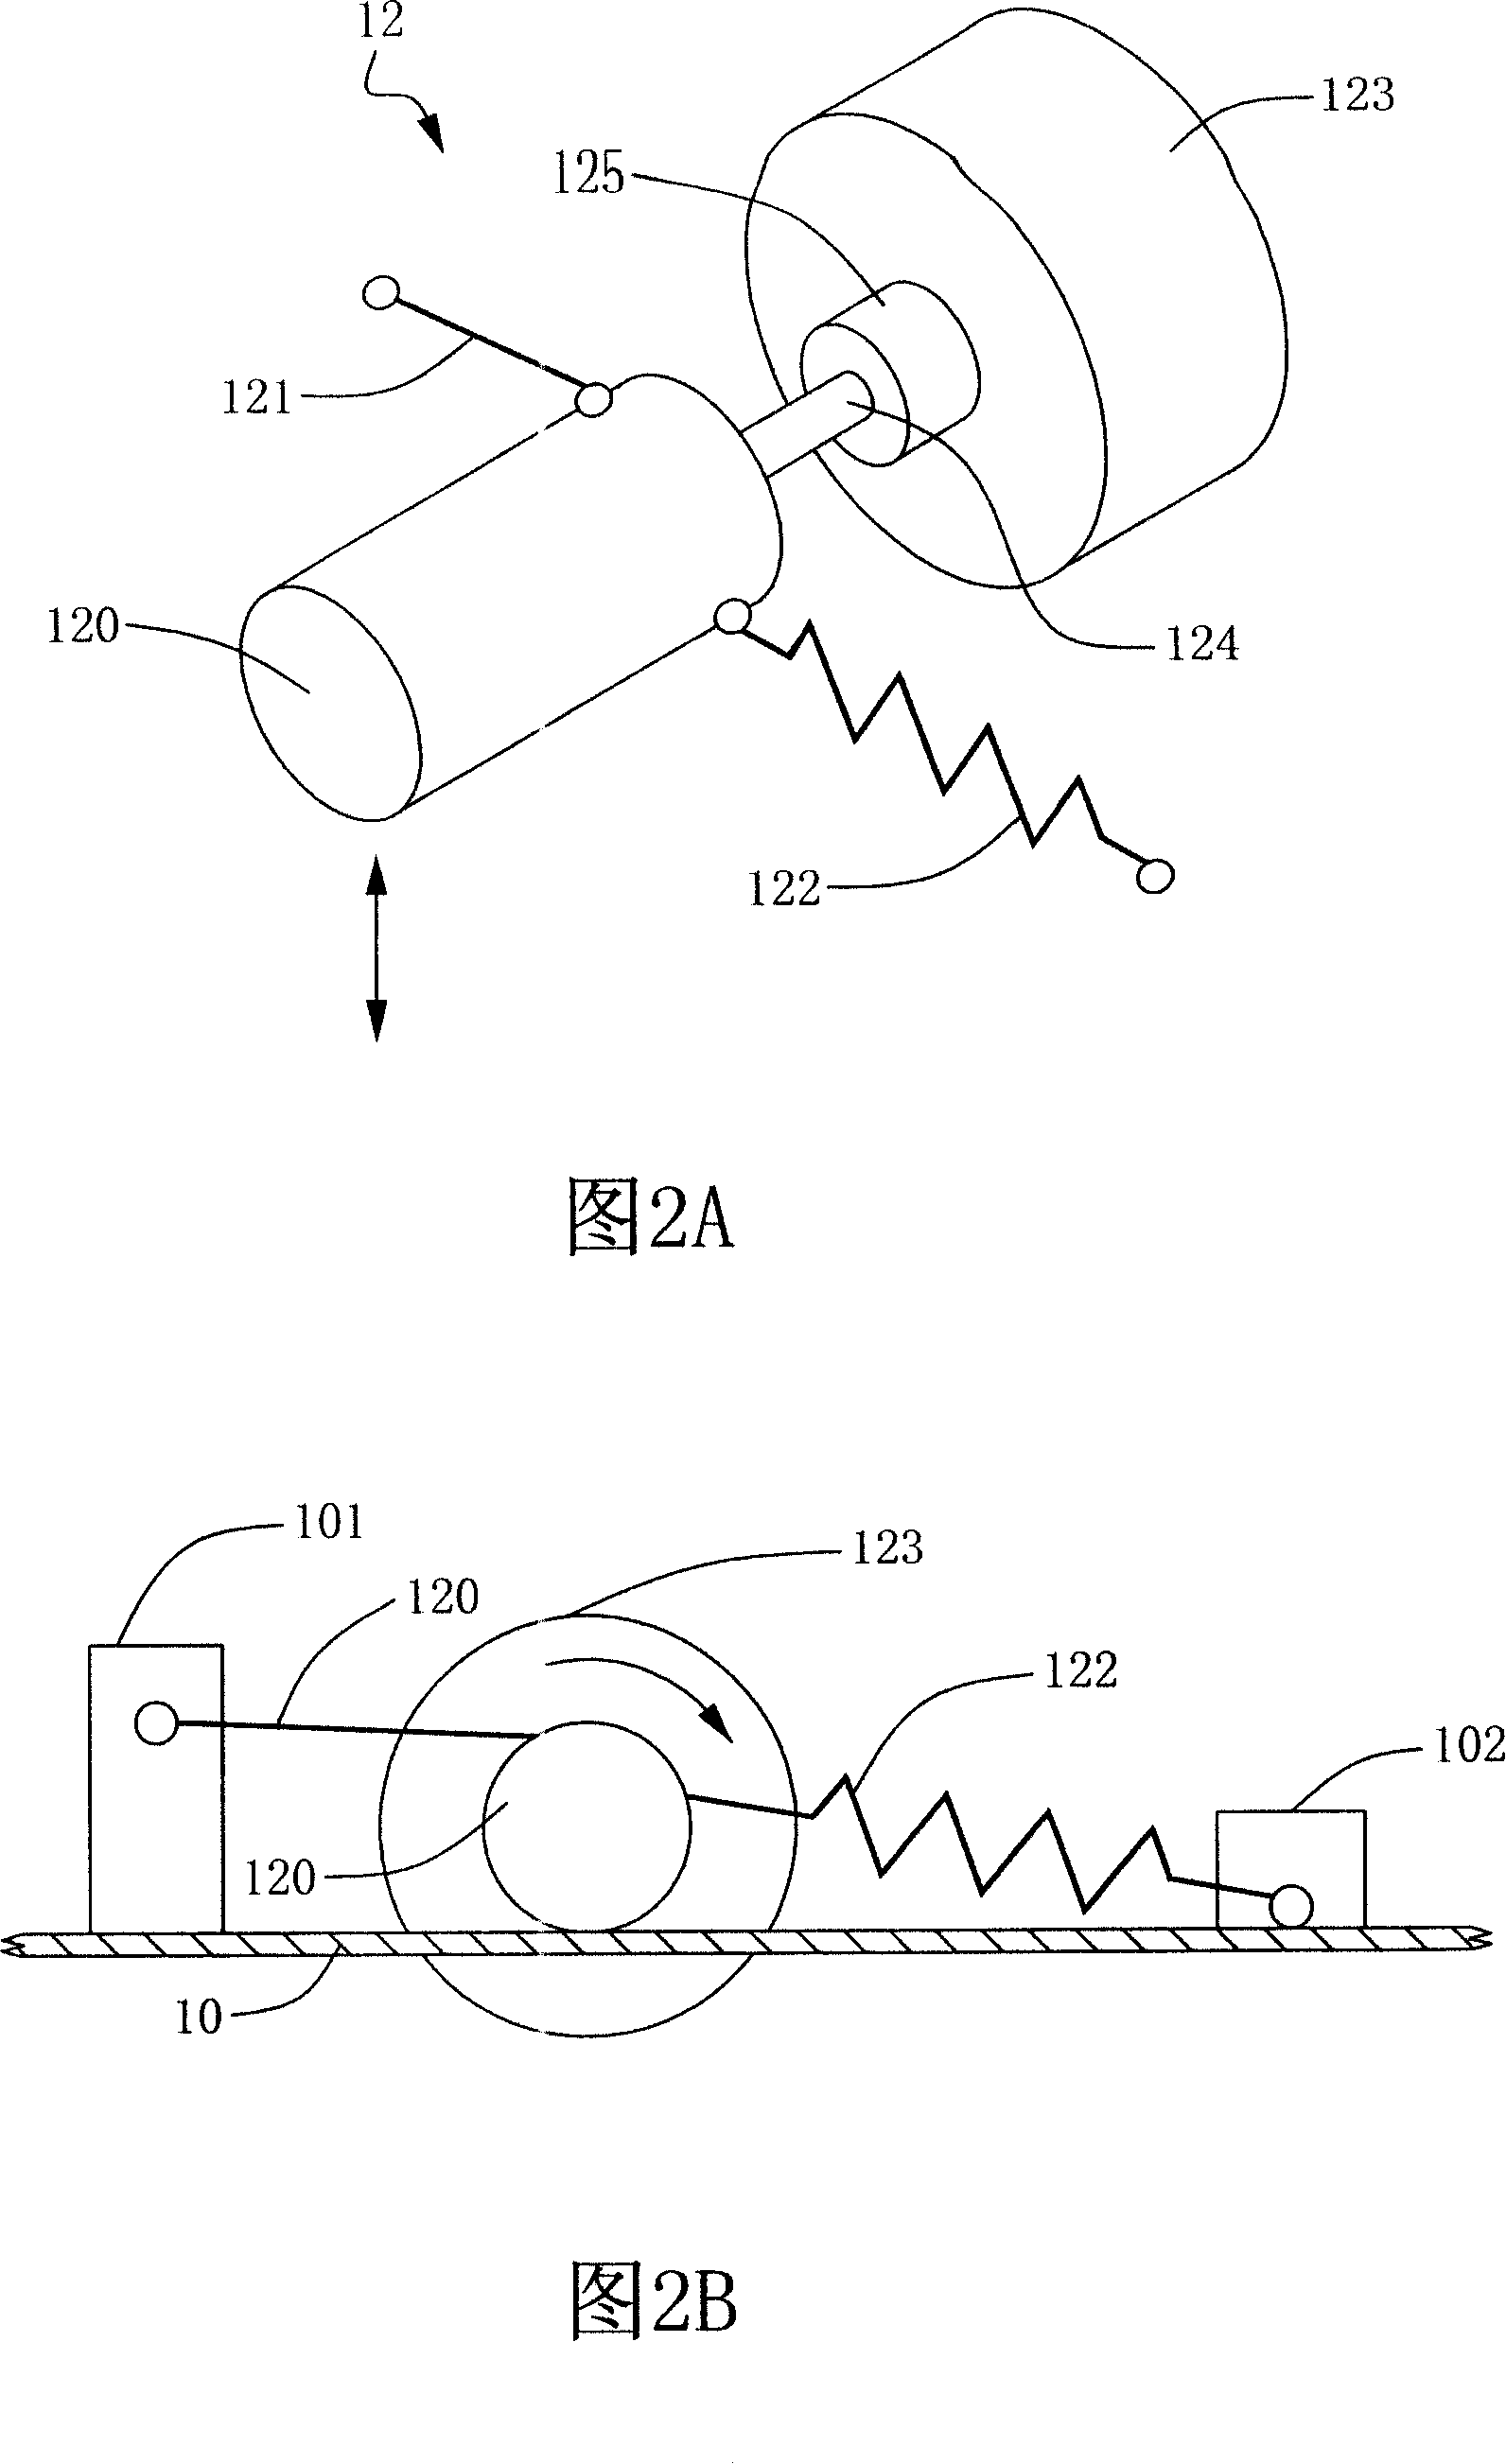 Self-propelled cleaning device